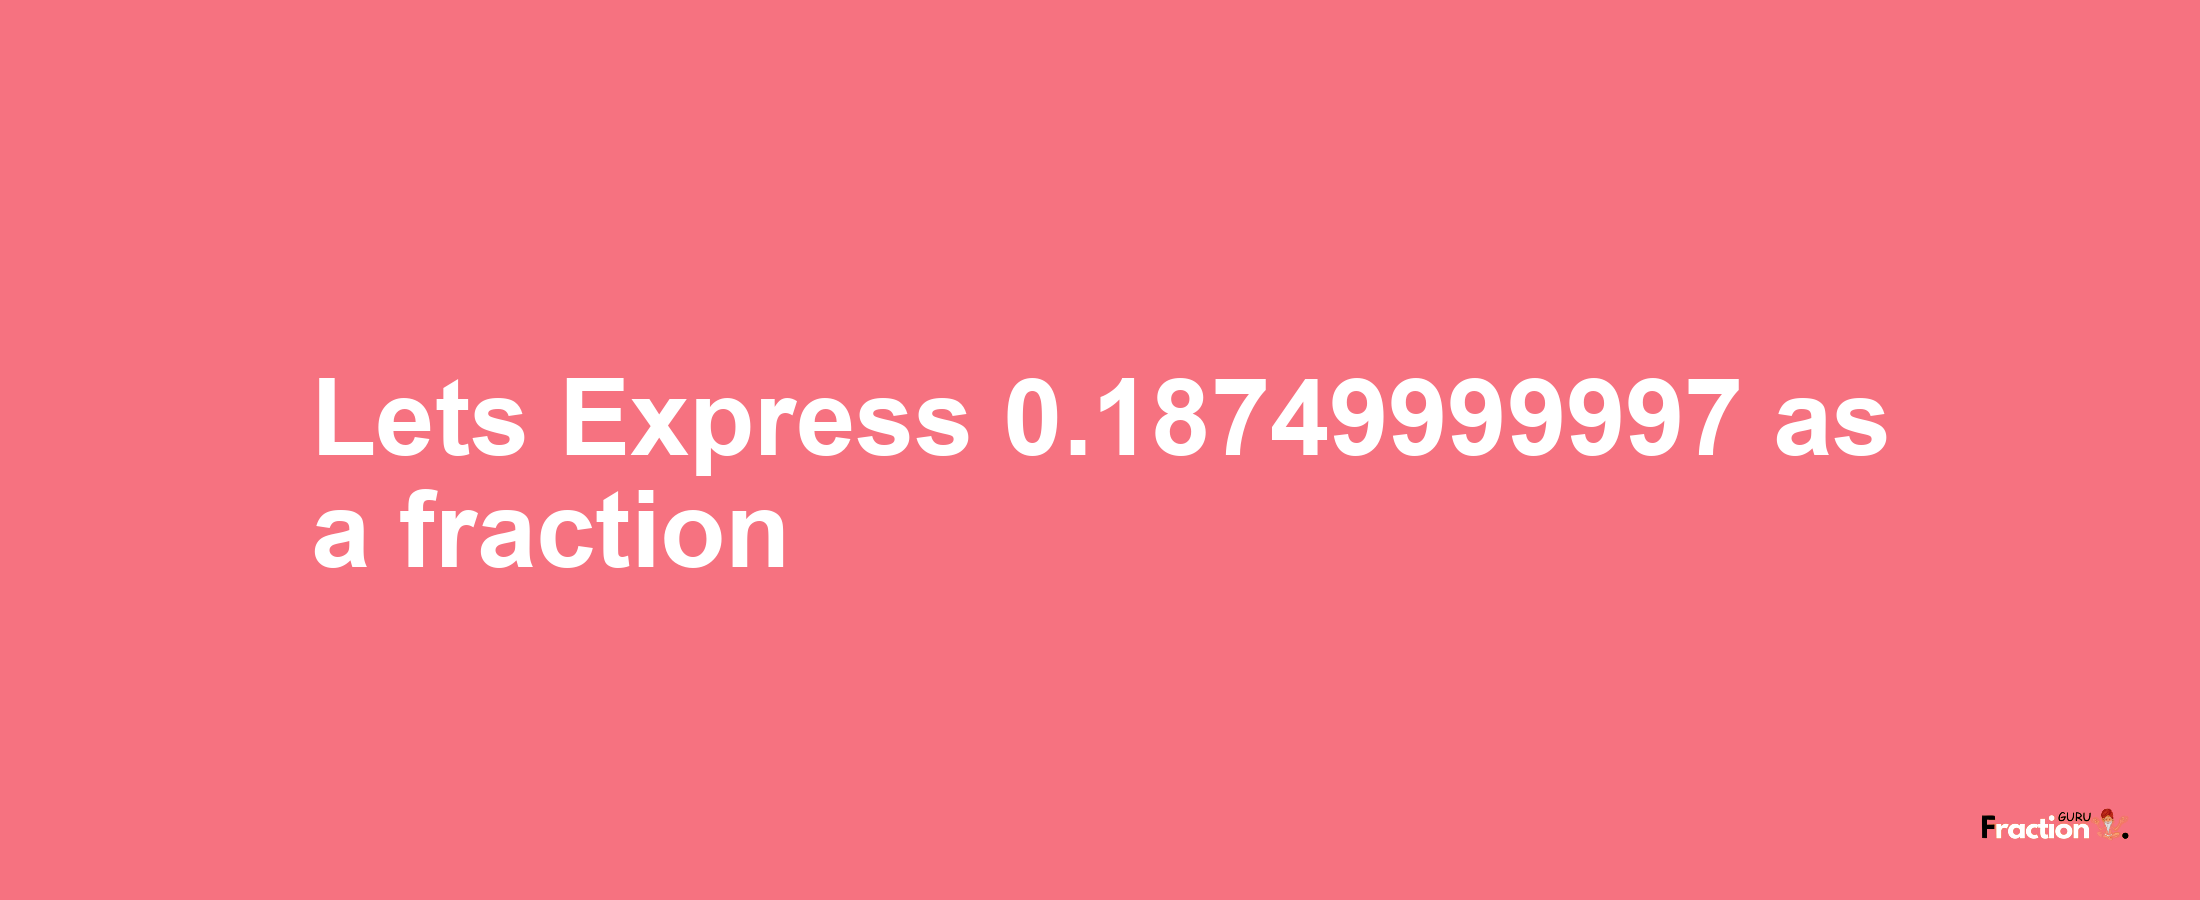 Lets Express 0.18749999997 as afraction